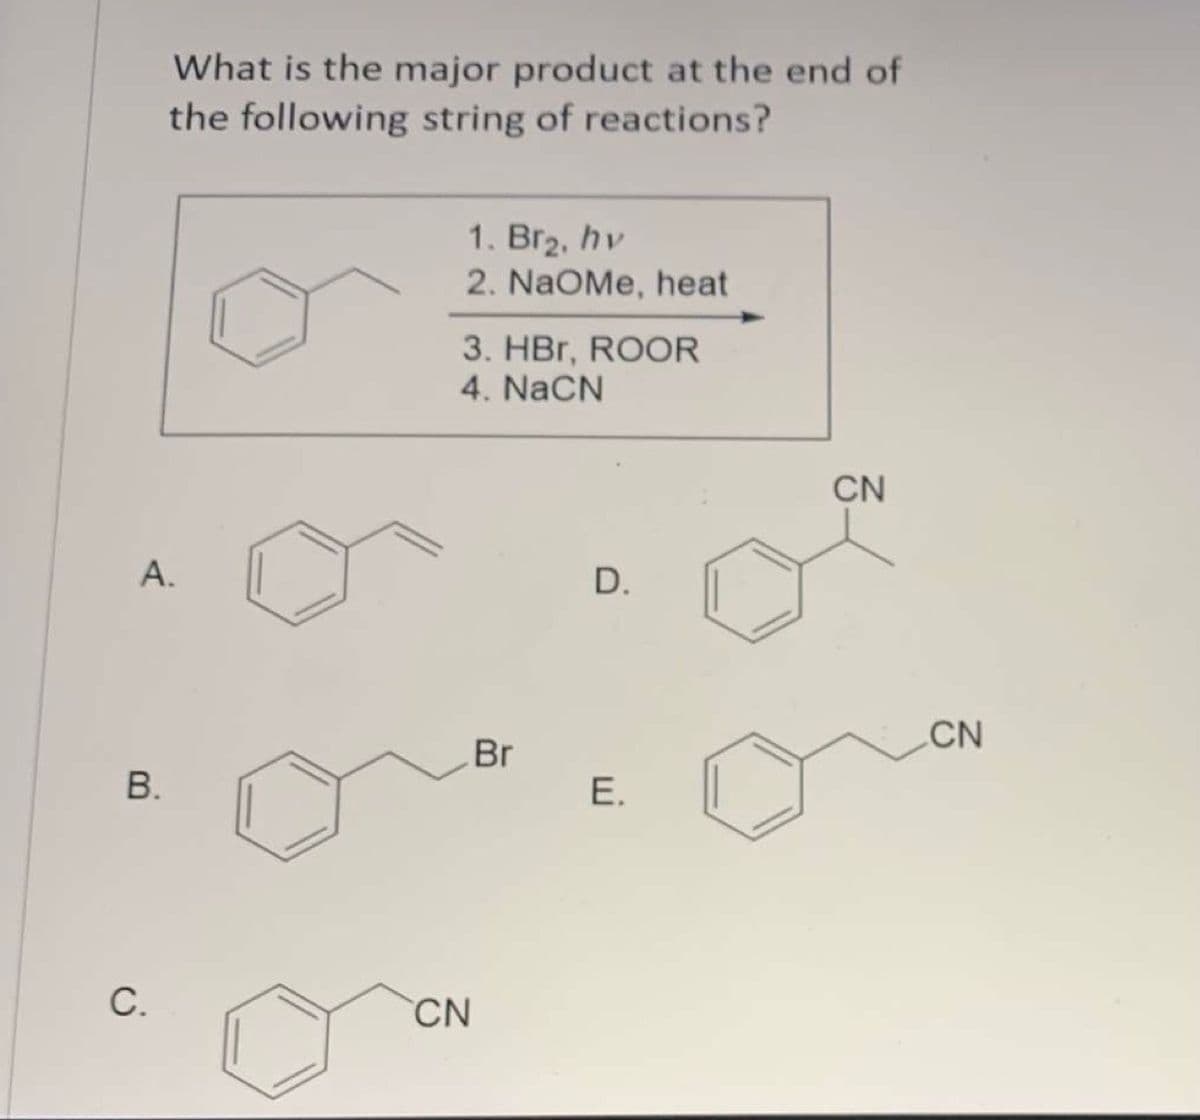 What is the major product at the end of
the following string of reactions?
1. Bг2, hv
2. NaOMe, heat
3. HBr, ROOR
4. NaCN
CN
А.
D.
CN
Br
C.
CN
E.
A.
B.
